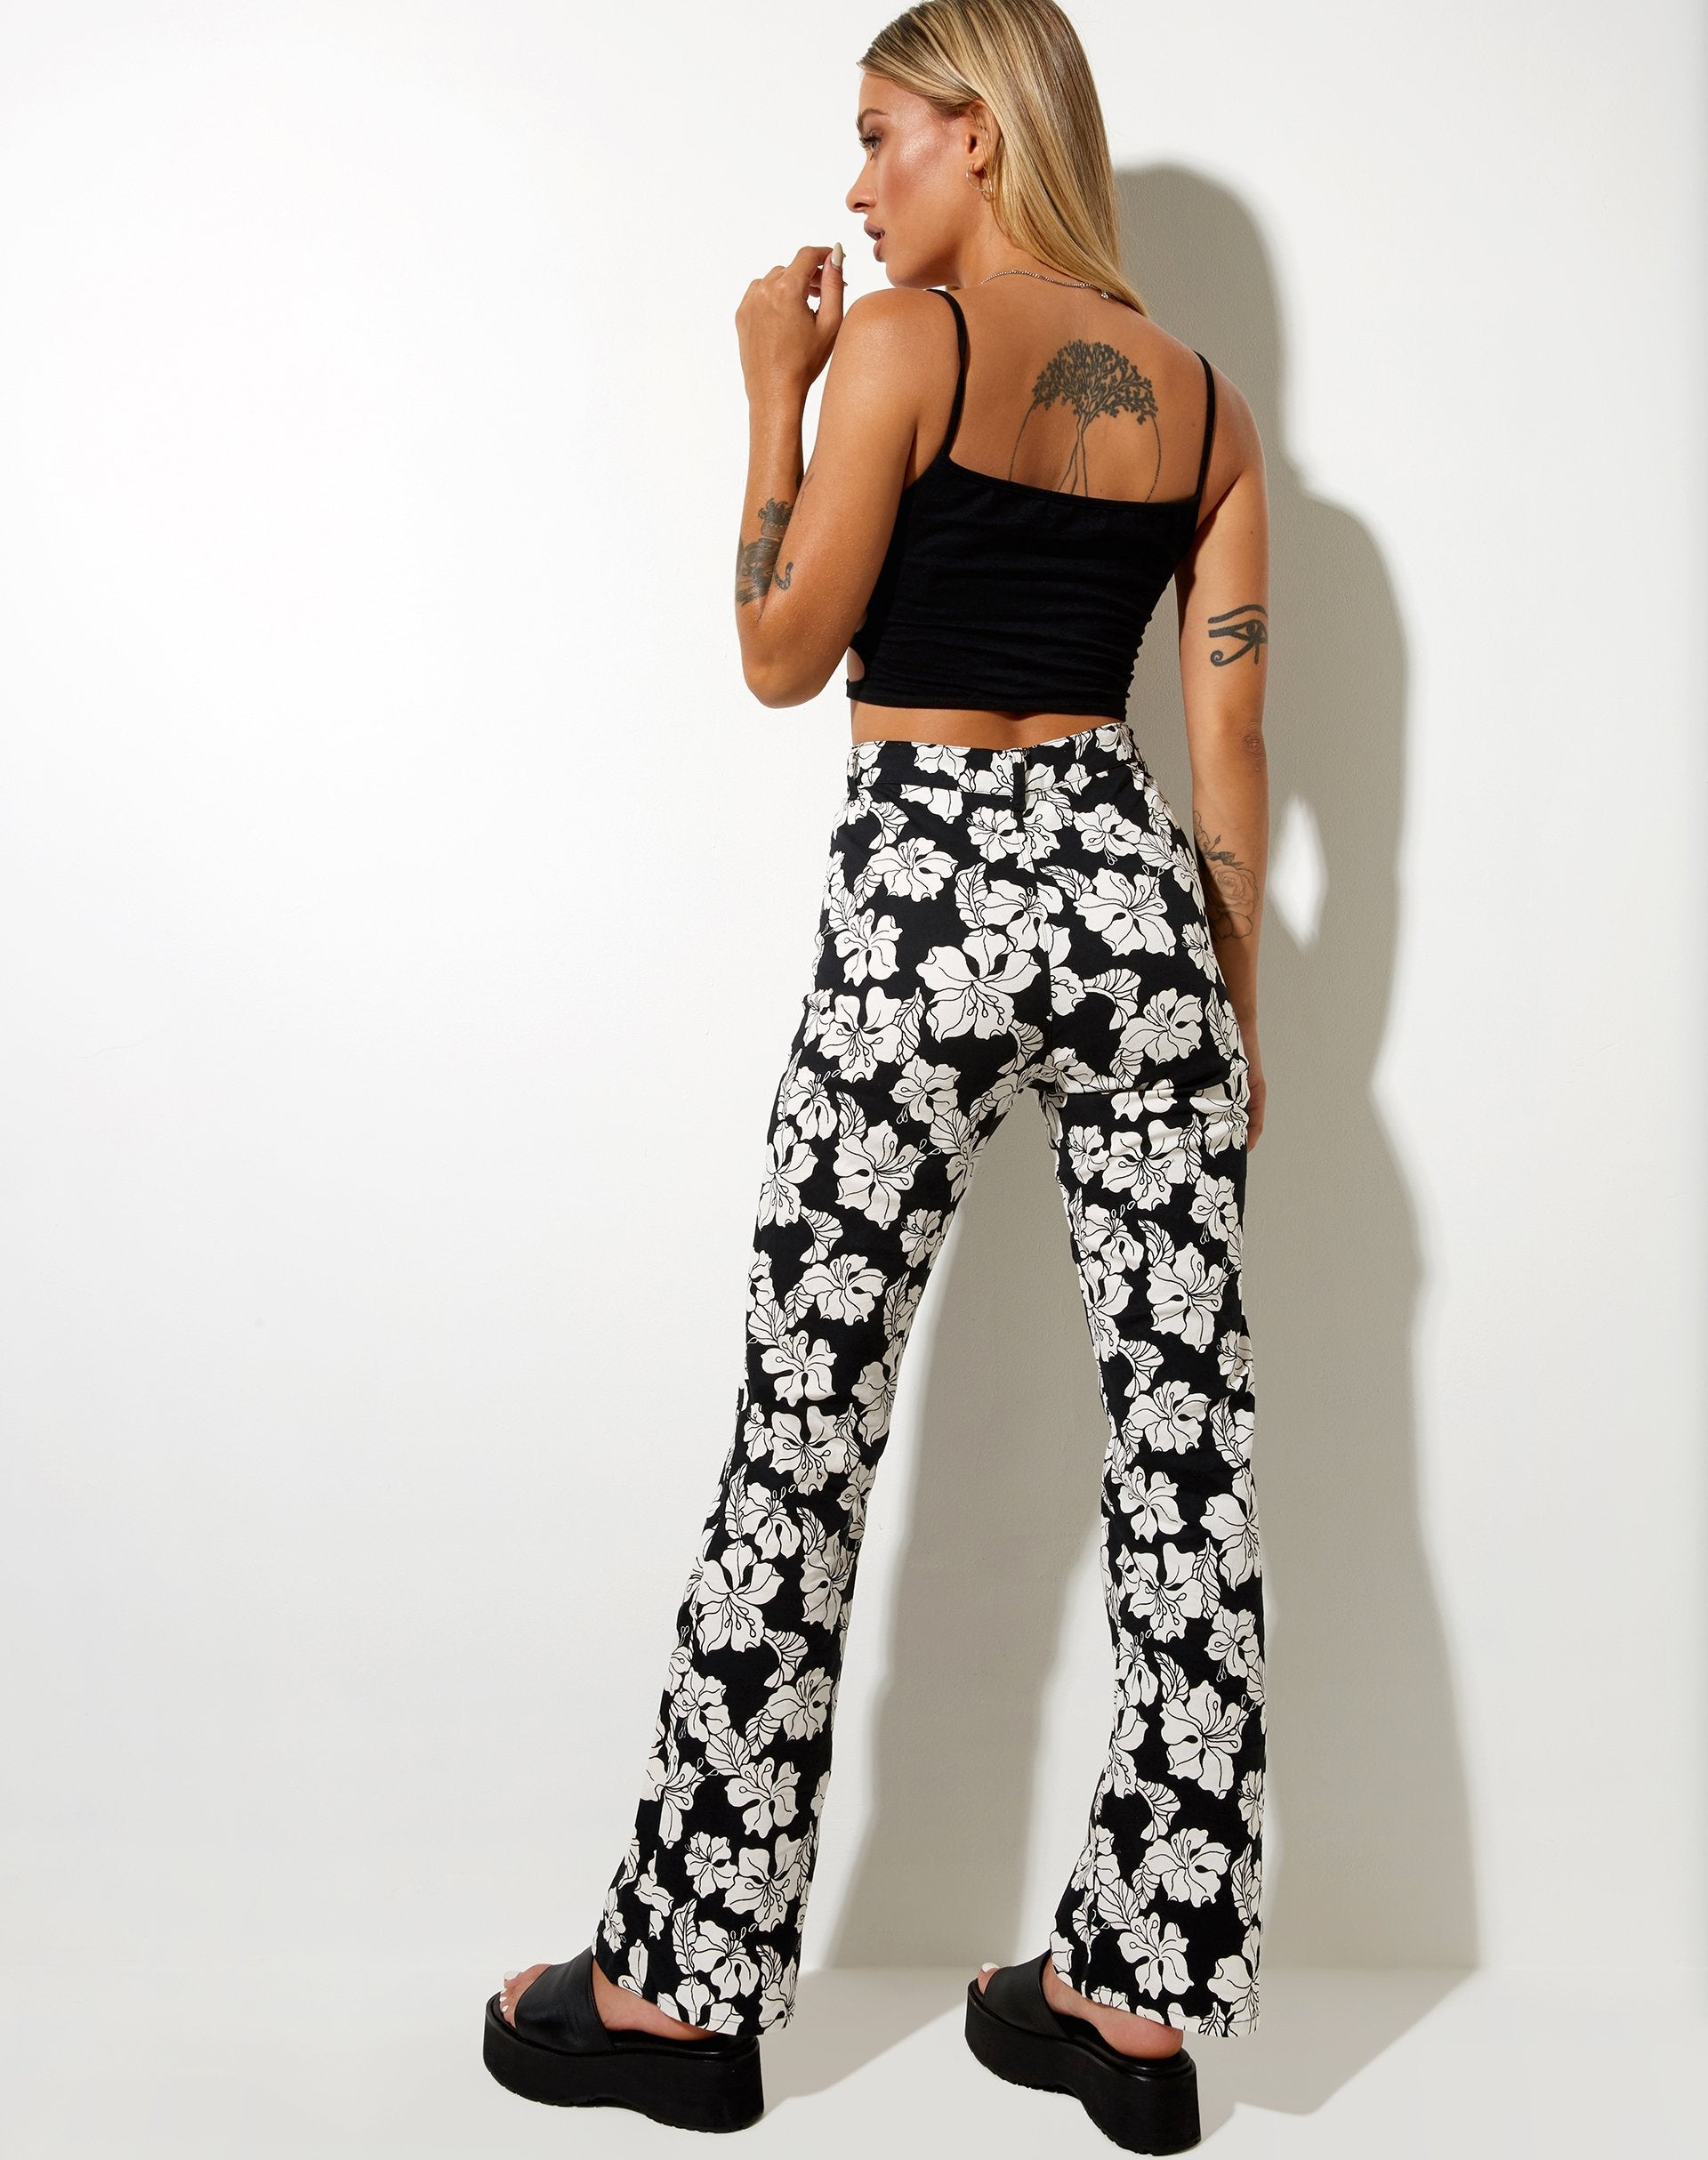 Zoven Trouser in Vacation Black White